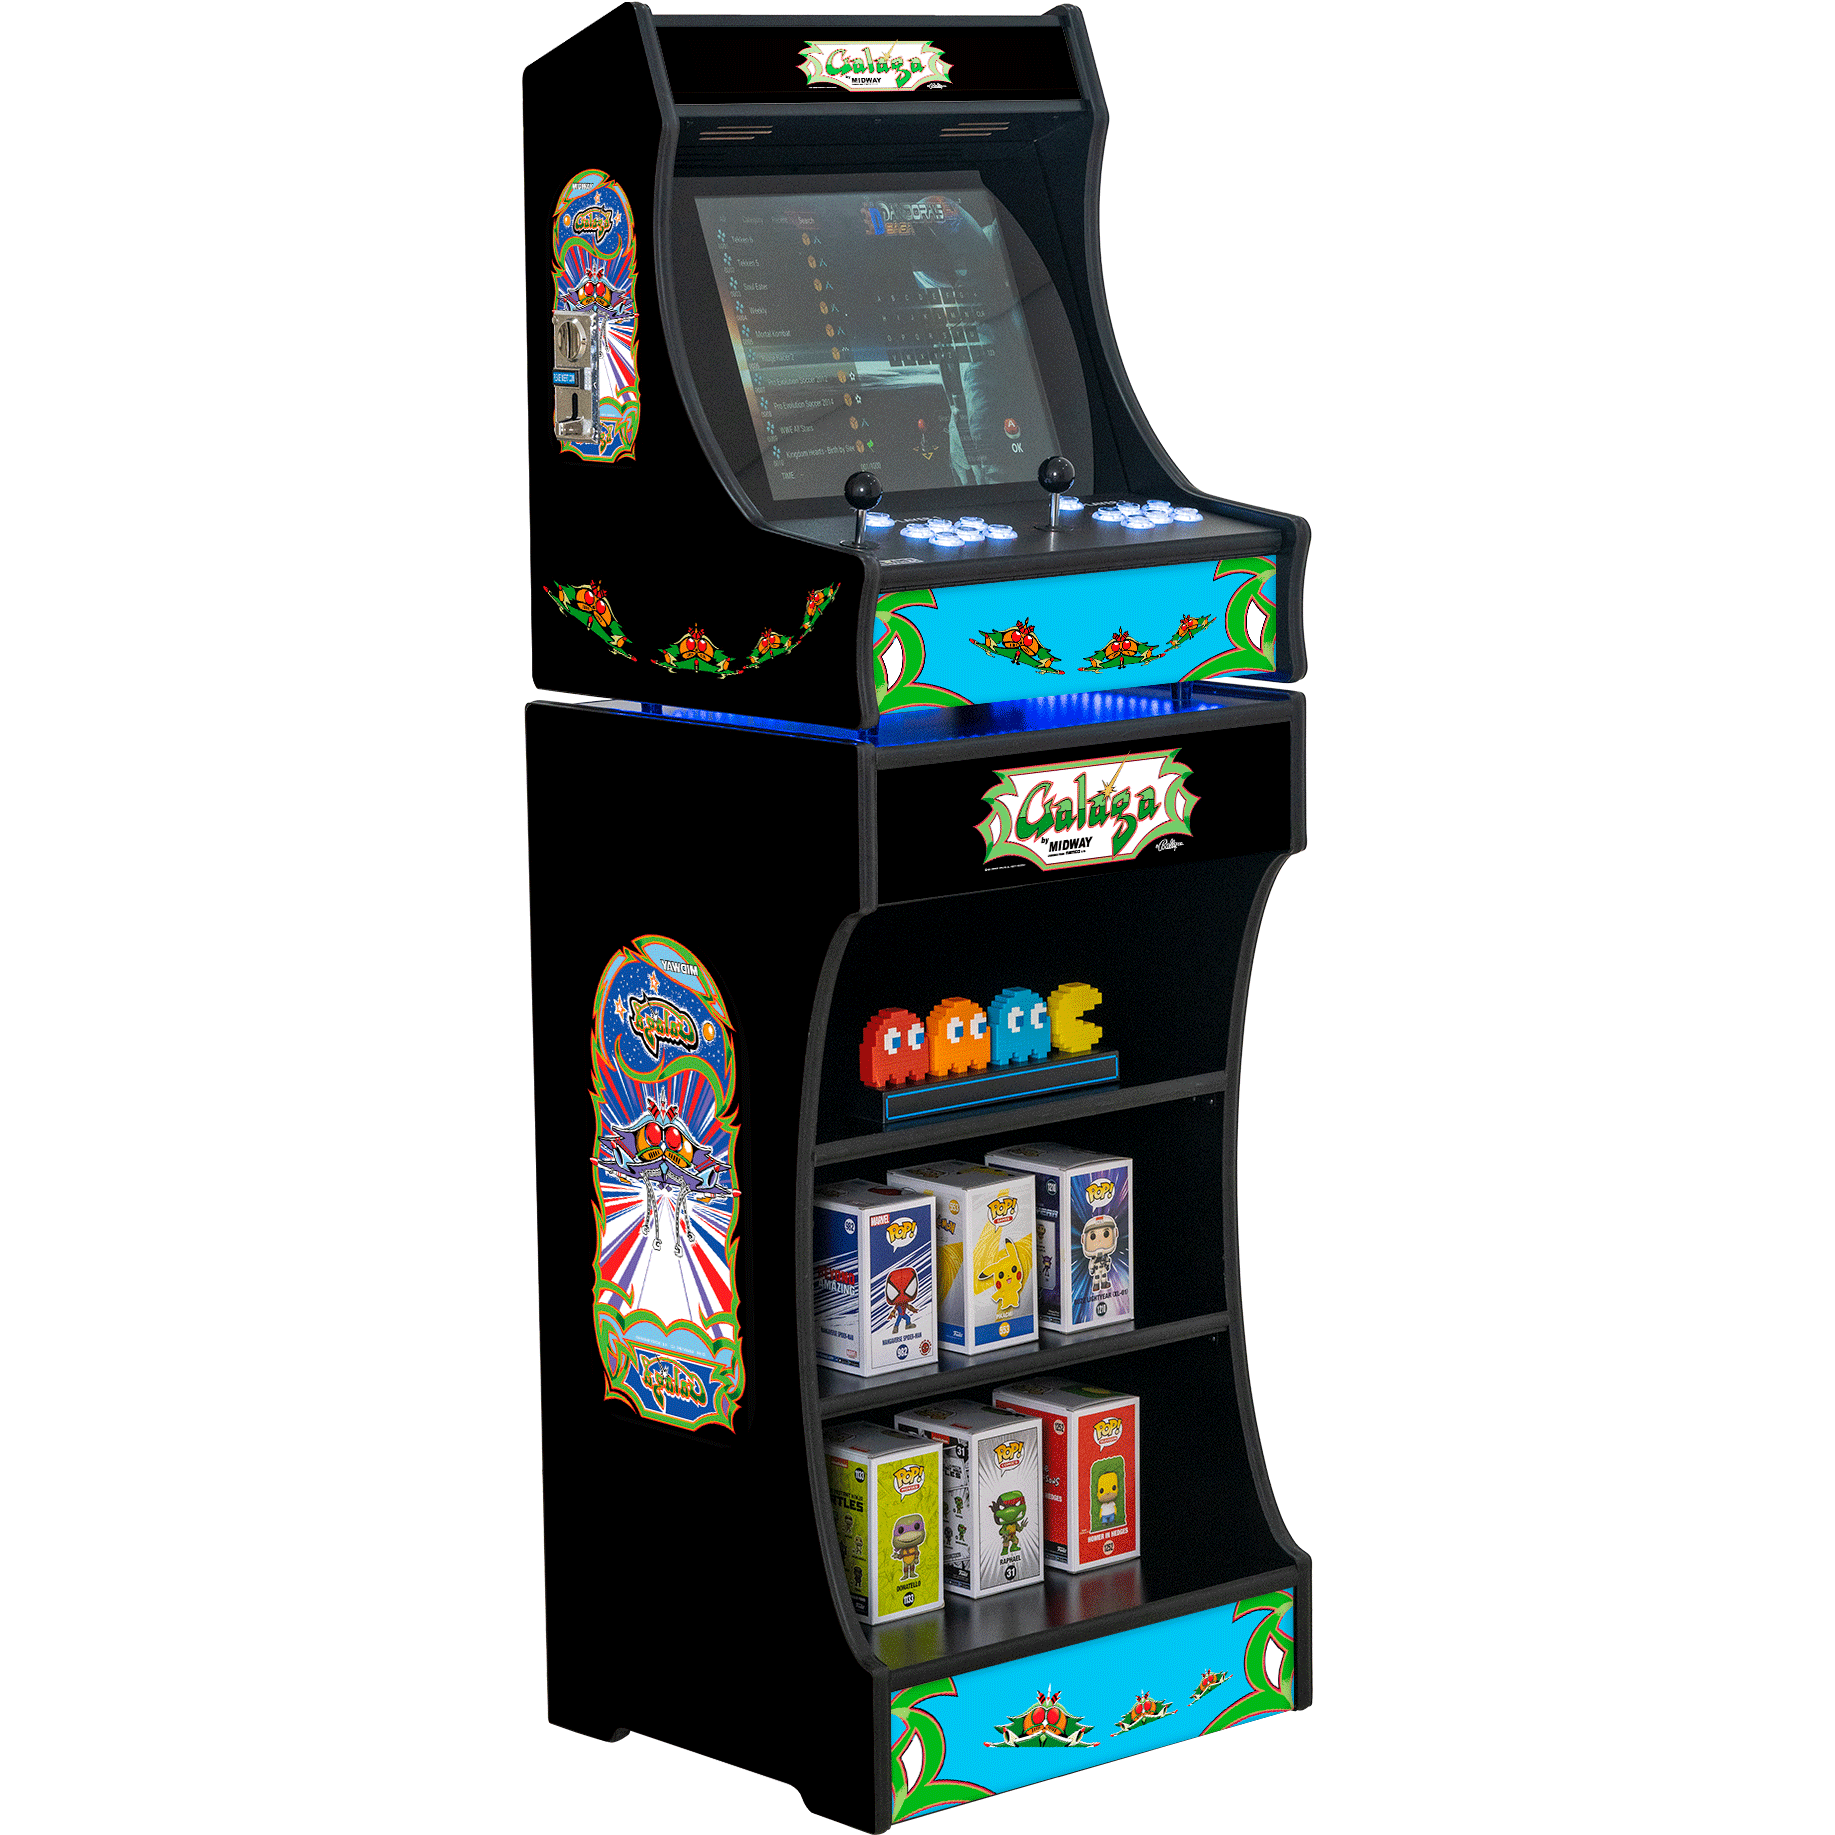 Upright 19 Inch Arcade Machine - 10,000 Games Included